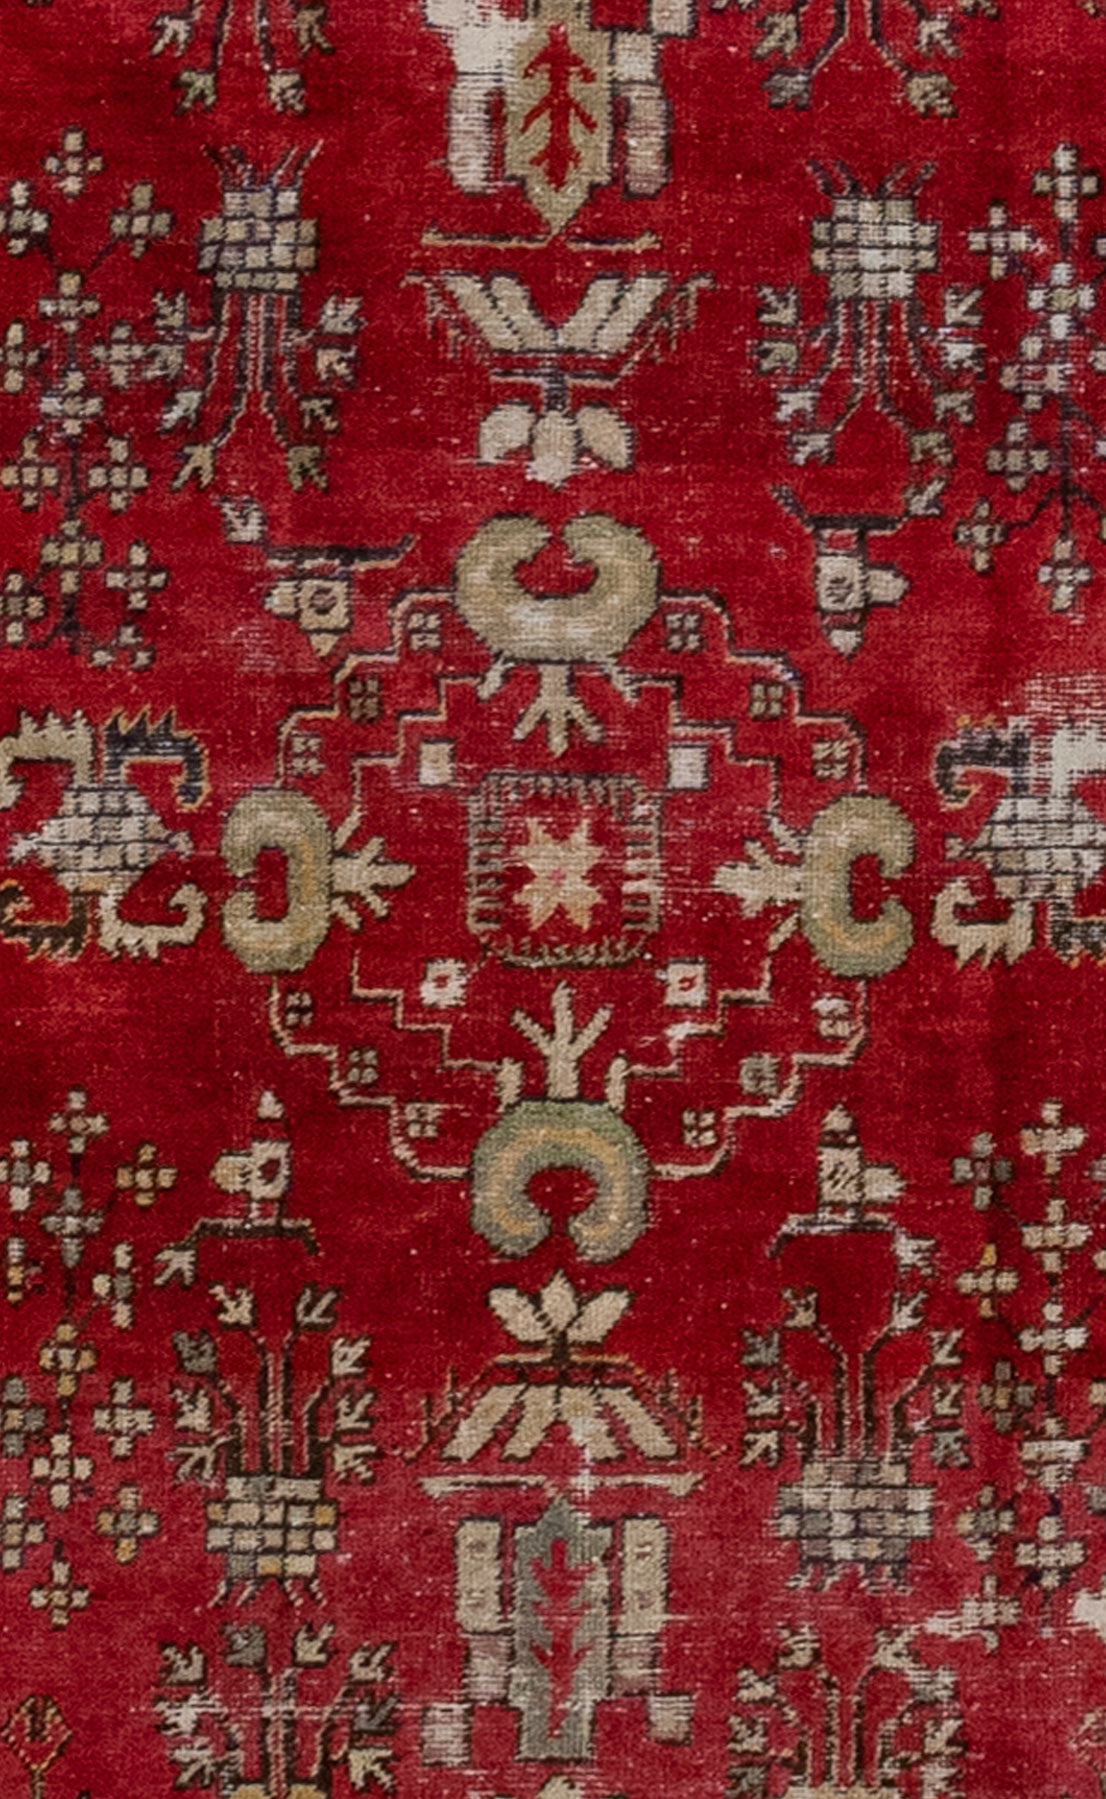 The center of the rug is a mandala with four curved croissants shapes arranged at each cardinal point.